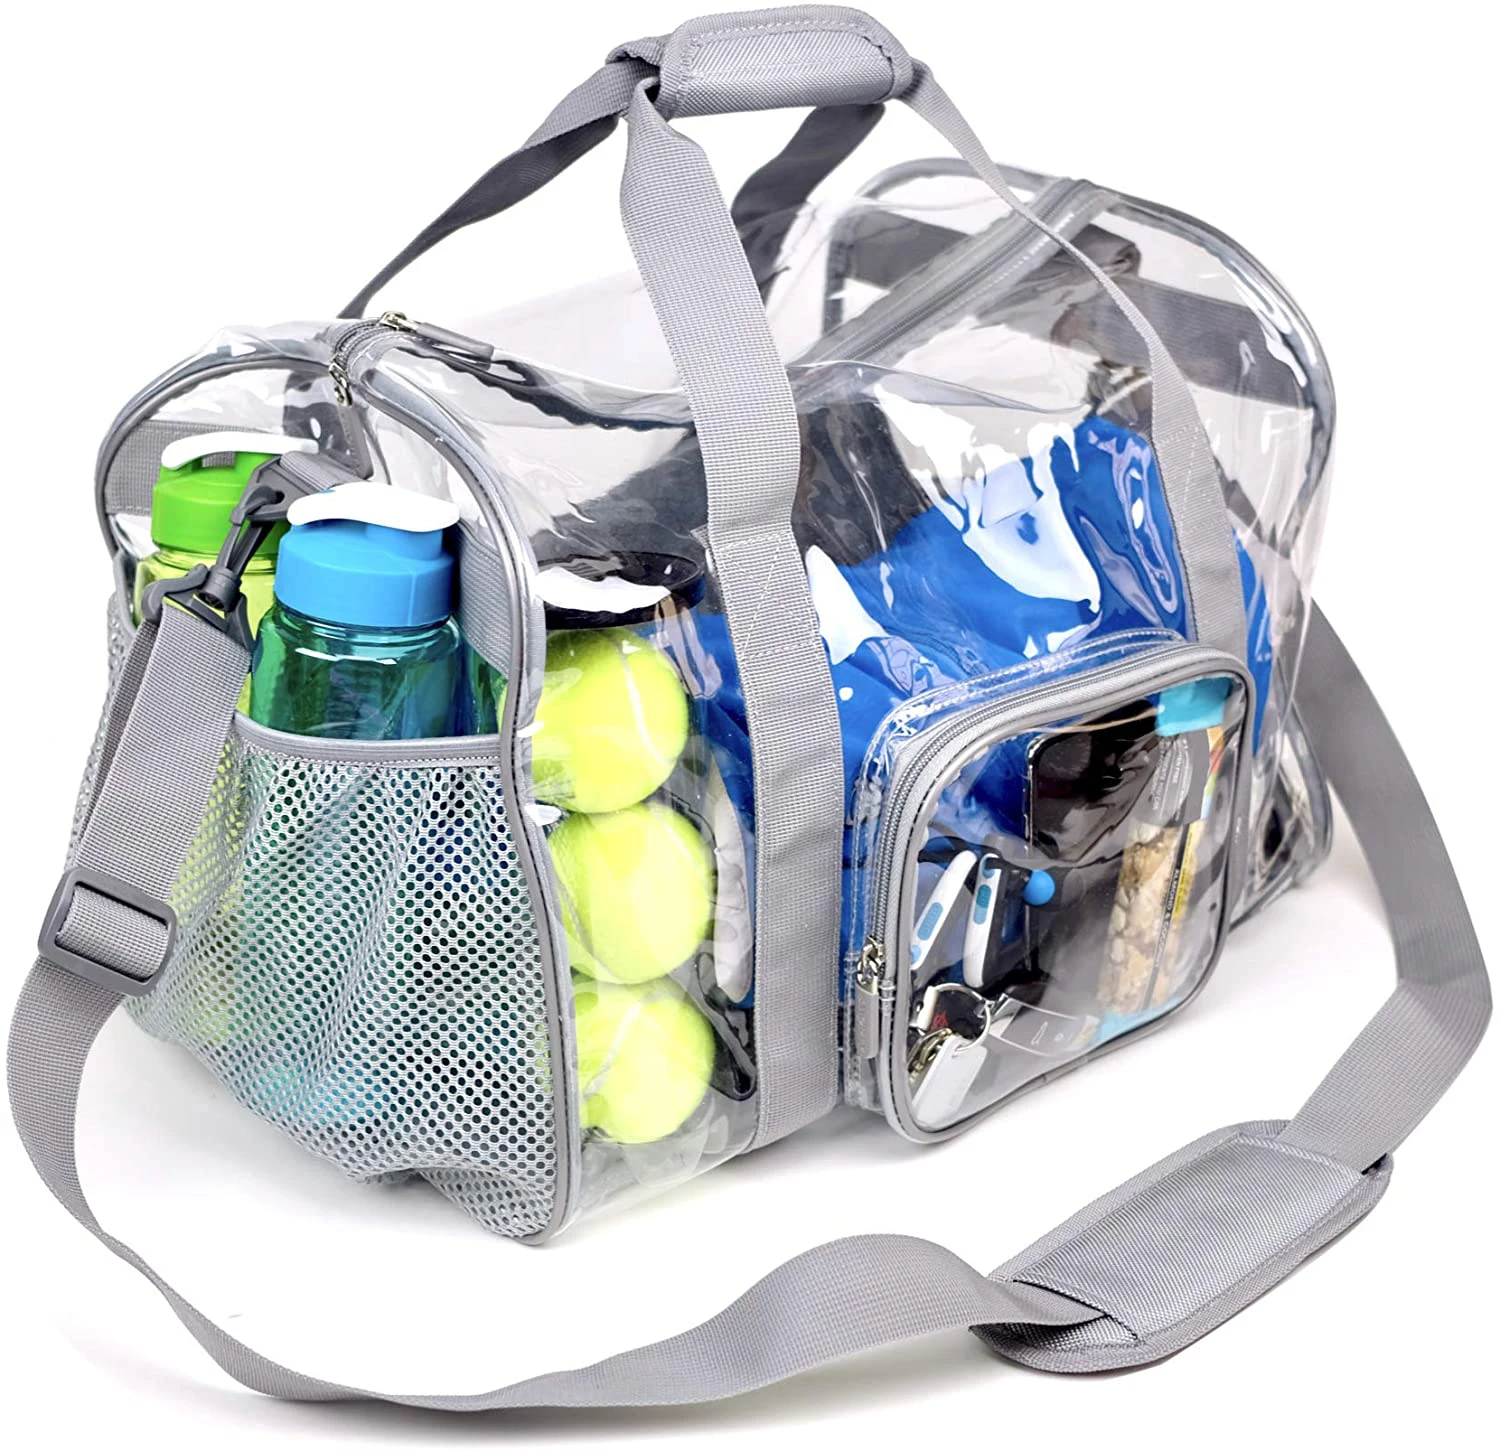 Source Clear pvc duffle bag clear gym bag for travel on m.